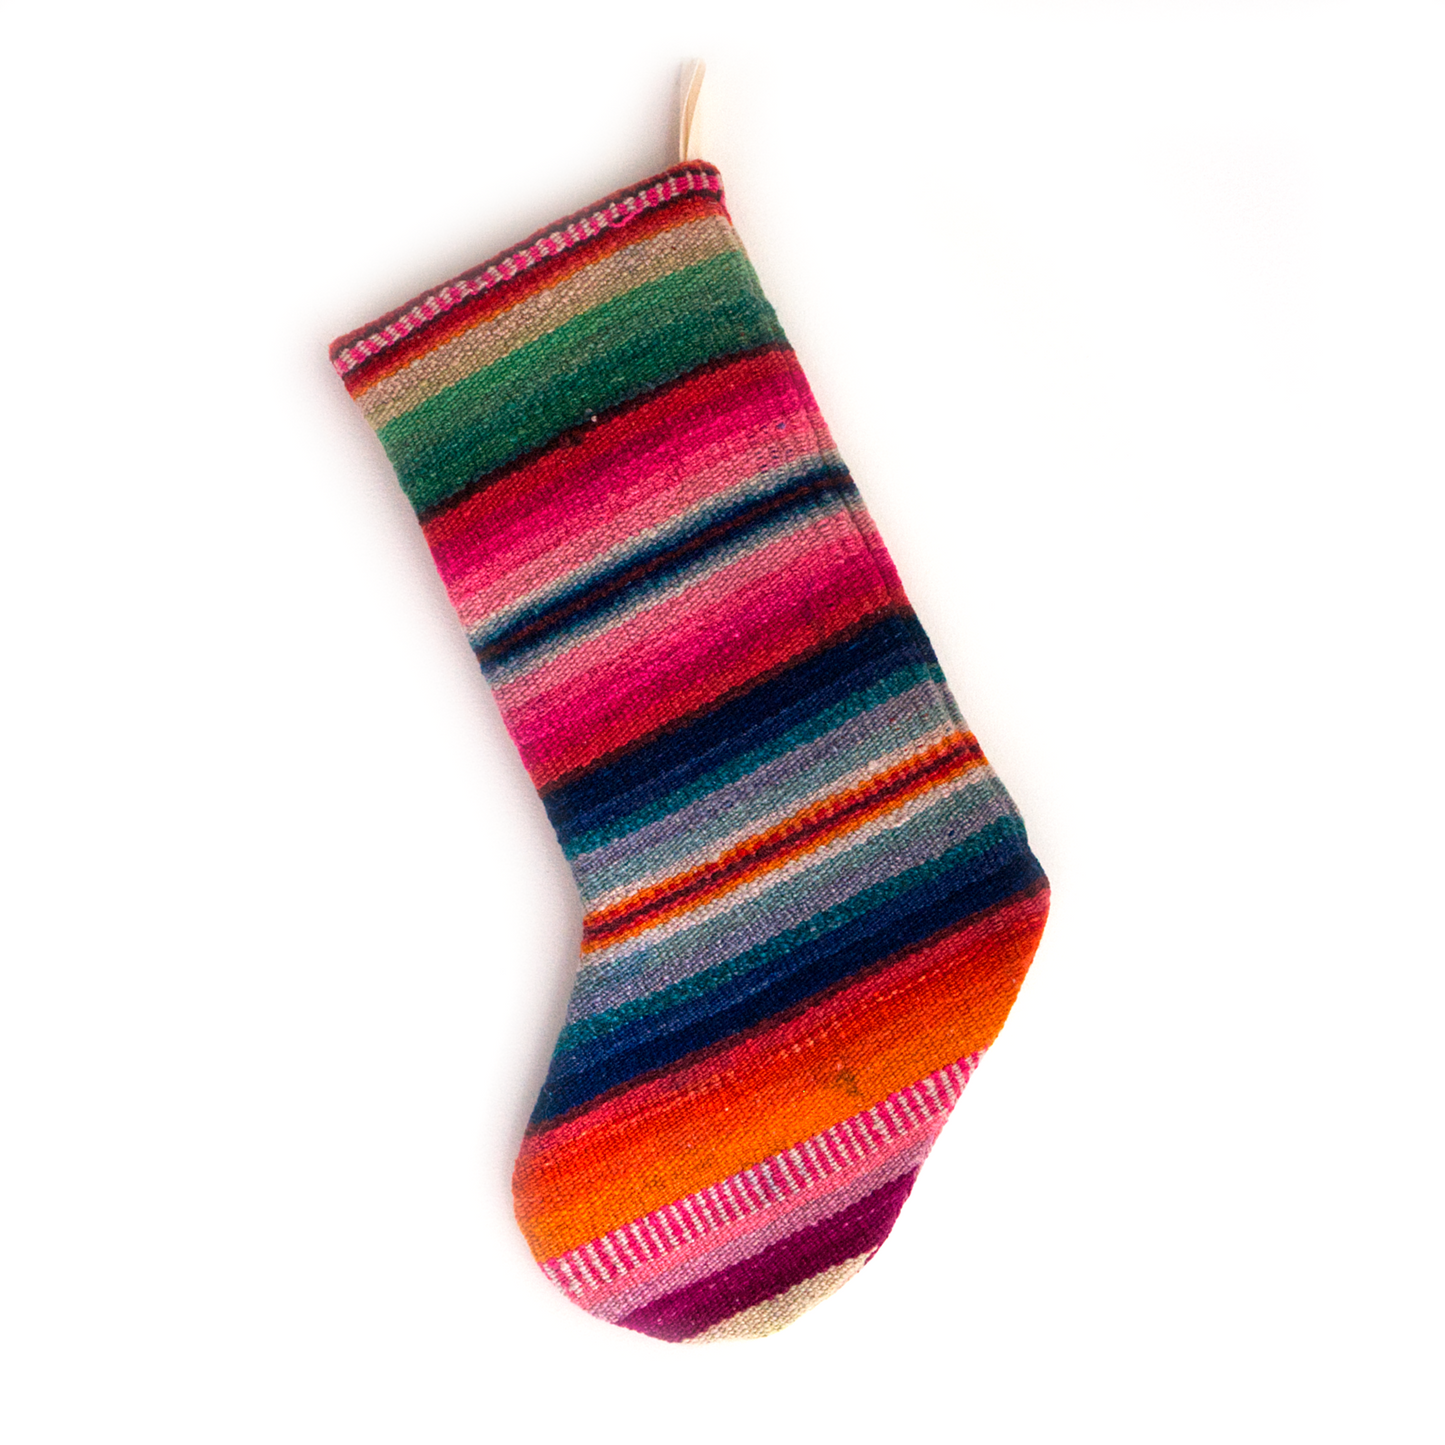 Intiearth_Peruvian_Frazada_Christmas_Stocking_no_7_multicolor_bright_and_colorful_one_of_a_kind.png